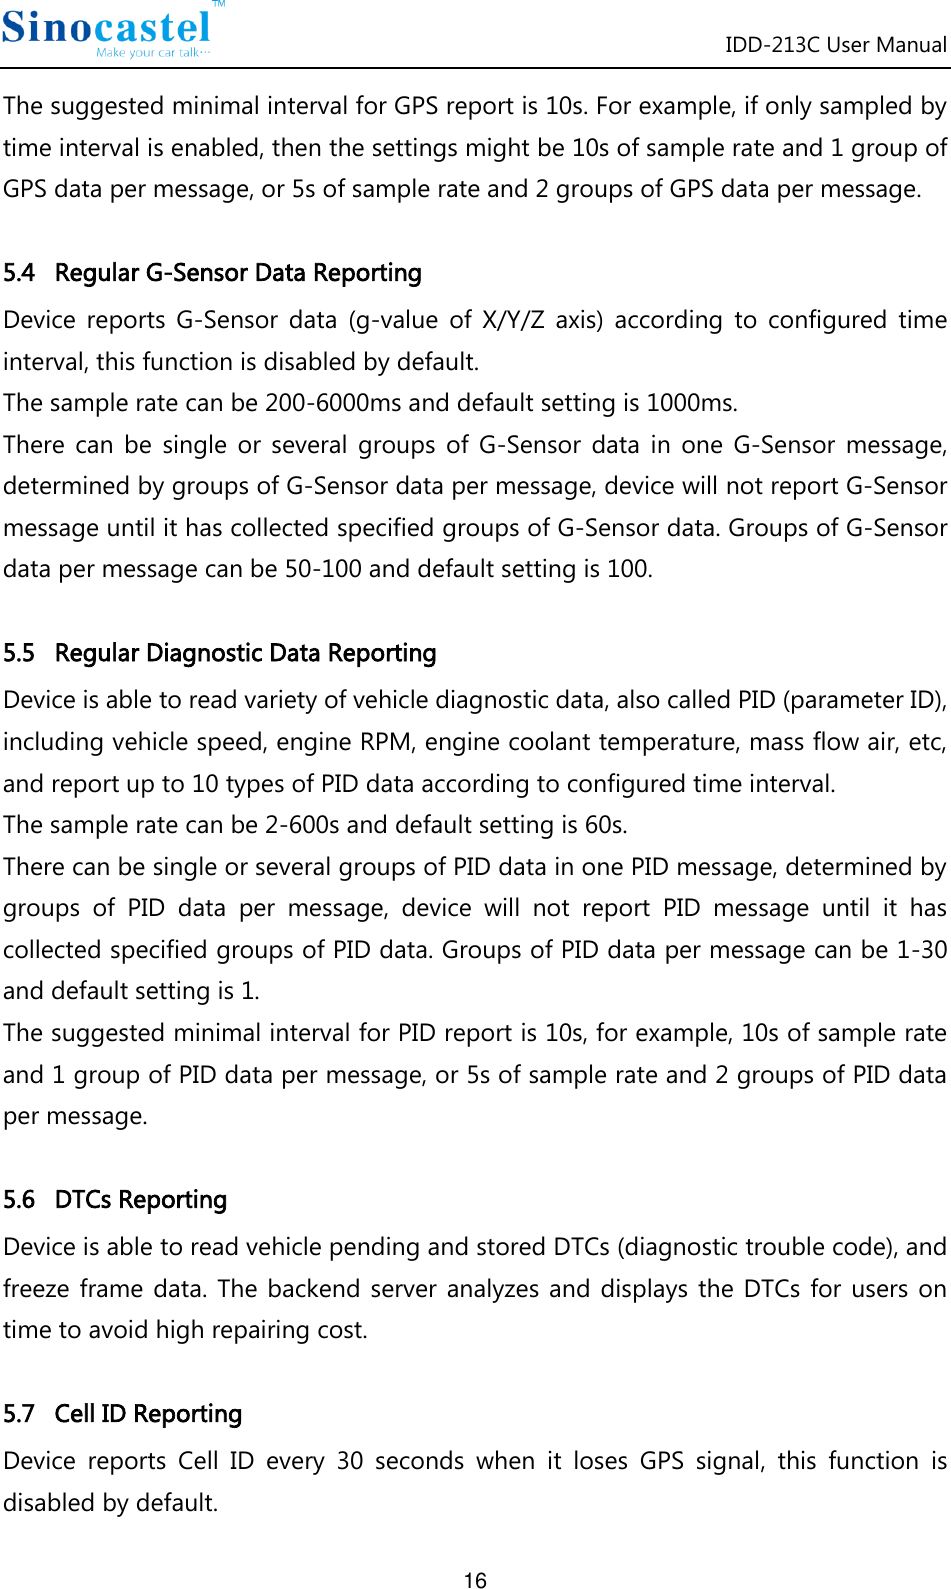 IDD-213C User Manual 16 The suggested minimal interval for GPS report is 10s. For example, if only sampled by time interval is enabled, then the settings might be 10s of sample rate and 1 group of GPS data per message, or 5s of sample rate and 2 groups of GPS data per message.  5.4   Regular G-Sensor Data Reporting Device  reports  G-Sensor  data  (g-value  of  X/Y/Z  axis)  according  to  configured  time interval, this function is disabled by default. The sample rate can be 200-6000ms and default setting is 1000ms. There  can  be  single  or  several  groups  of  G-Sensor  data  in  one  G-Sensor  message, determined by groups of G-Sensor data per message, device will not report G-Sensor message until it has collected specified groups of G-Sensor data. Groups of G-Sensor data per message can be 50-100 and default setting is 100.  5.5   Regular Diagnostic Data Reporting Device is able to read variety of vehicle diagnostic data, also called PID (parameter ID), including vehicle speed, engine RPM, engine coolant temperature, mass flow air, etc, and report up to 10 types of PID data according to configured time interval.   The sample rate can be 2-600s and default setting is 60s. There can be single or several groups of PID data in one PID message, determined by groups  of  PID  data  per  message,  device  will  not  report  PID  message  until  it  has collected specified groups of PID data. Groups of PID data per message can be 1-30 and default setting is 1. The suggested minimal interval for PID report is 10s, for example, 10s of sample rate and 1 group of PID data per message, or 5s of sample rate and 2 groups of PID data per message.  5.6   DTCs Reporting Device is able to read vehicle pending and stored DTCs (diagnostic trouble code), and freeze frame  data.  The  backend  server analyzes and displays  the  DTCs  for users  on time to avoid high repairing cost.  5.7   Cell ID Reporting Device  reports  Cell  ID  every  30  seconds  when  it  loses  GPS  signal,  this  function  is disabled by default. 